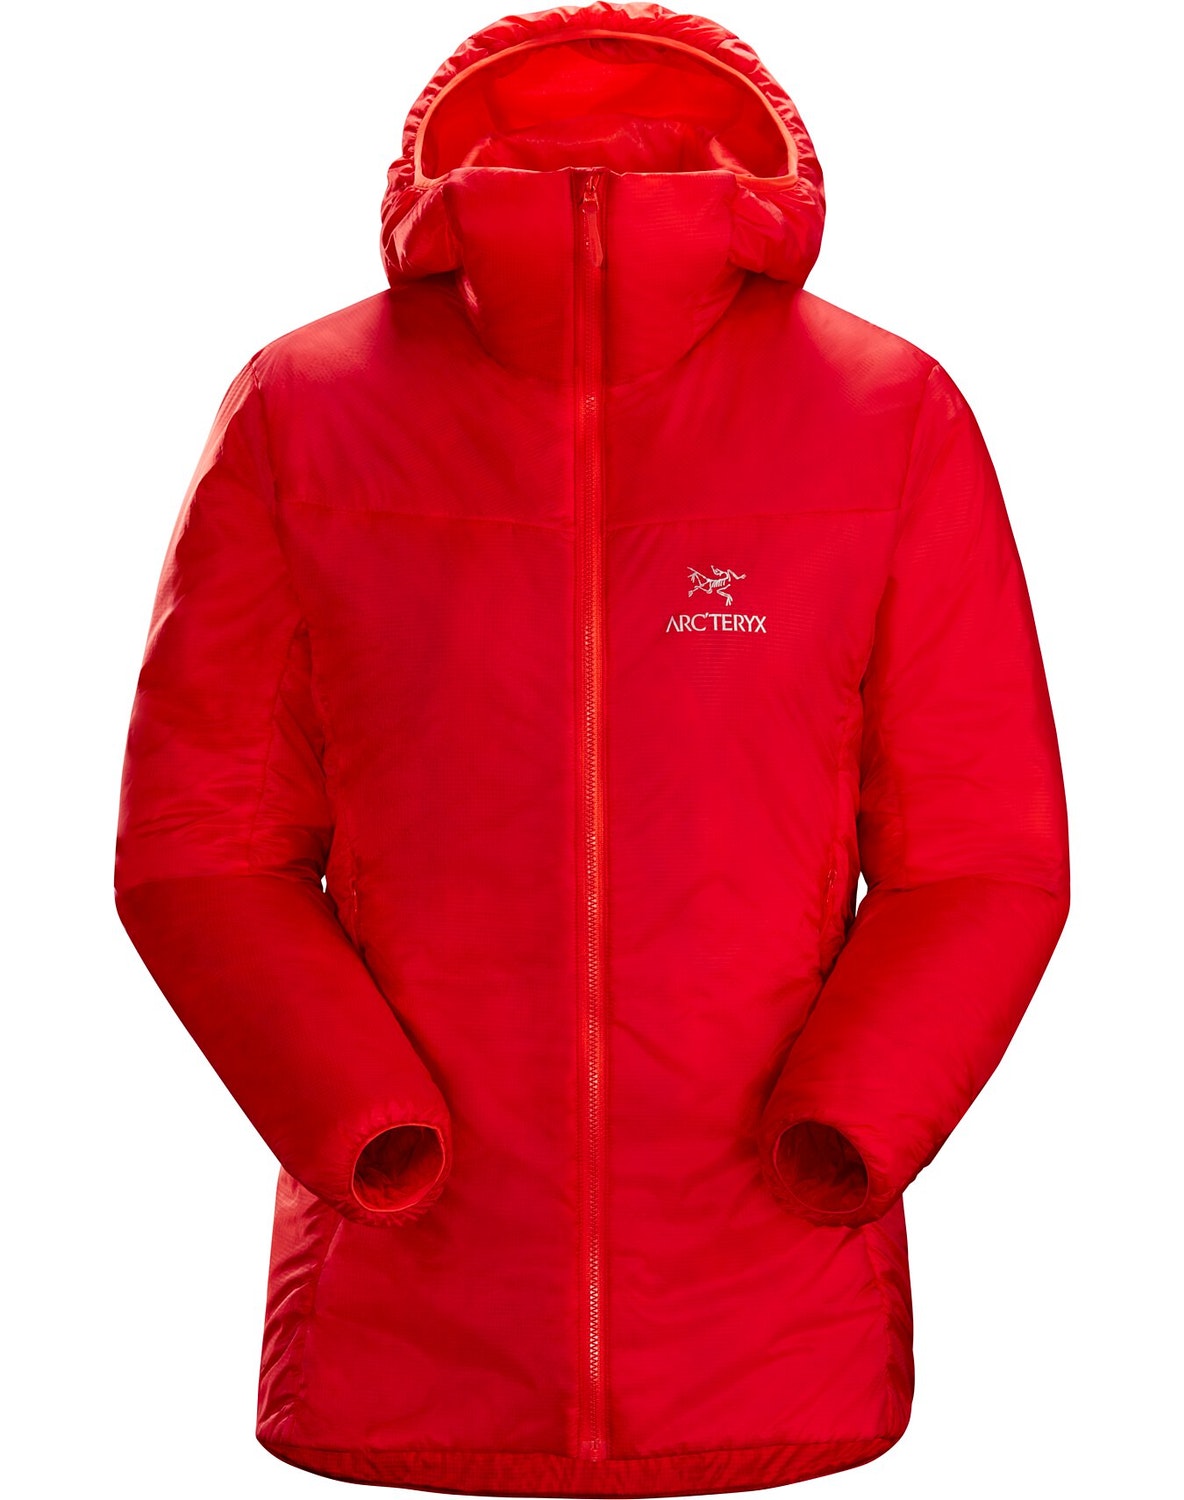 Giacca Rush Arc'teryx Nuclei FL Donna Rosse - IT-133635